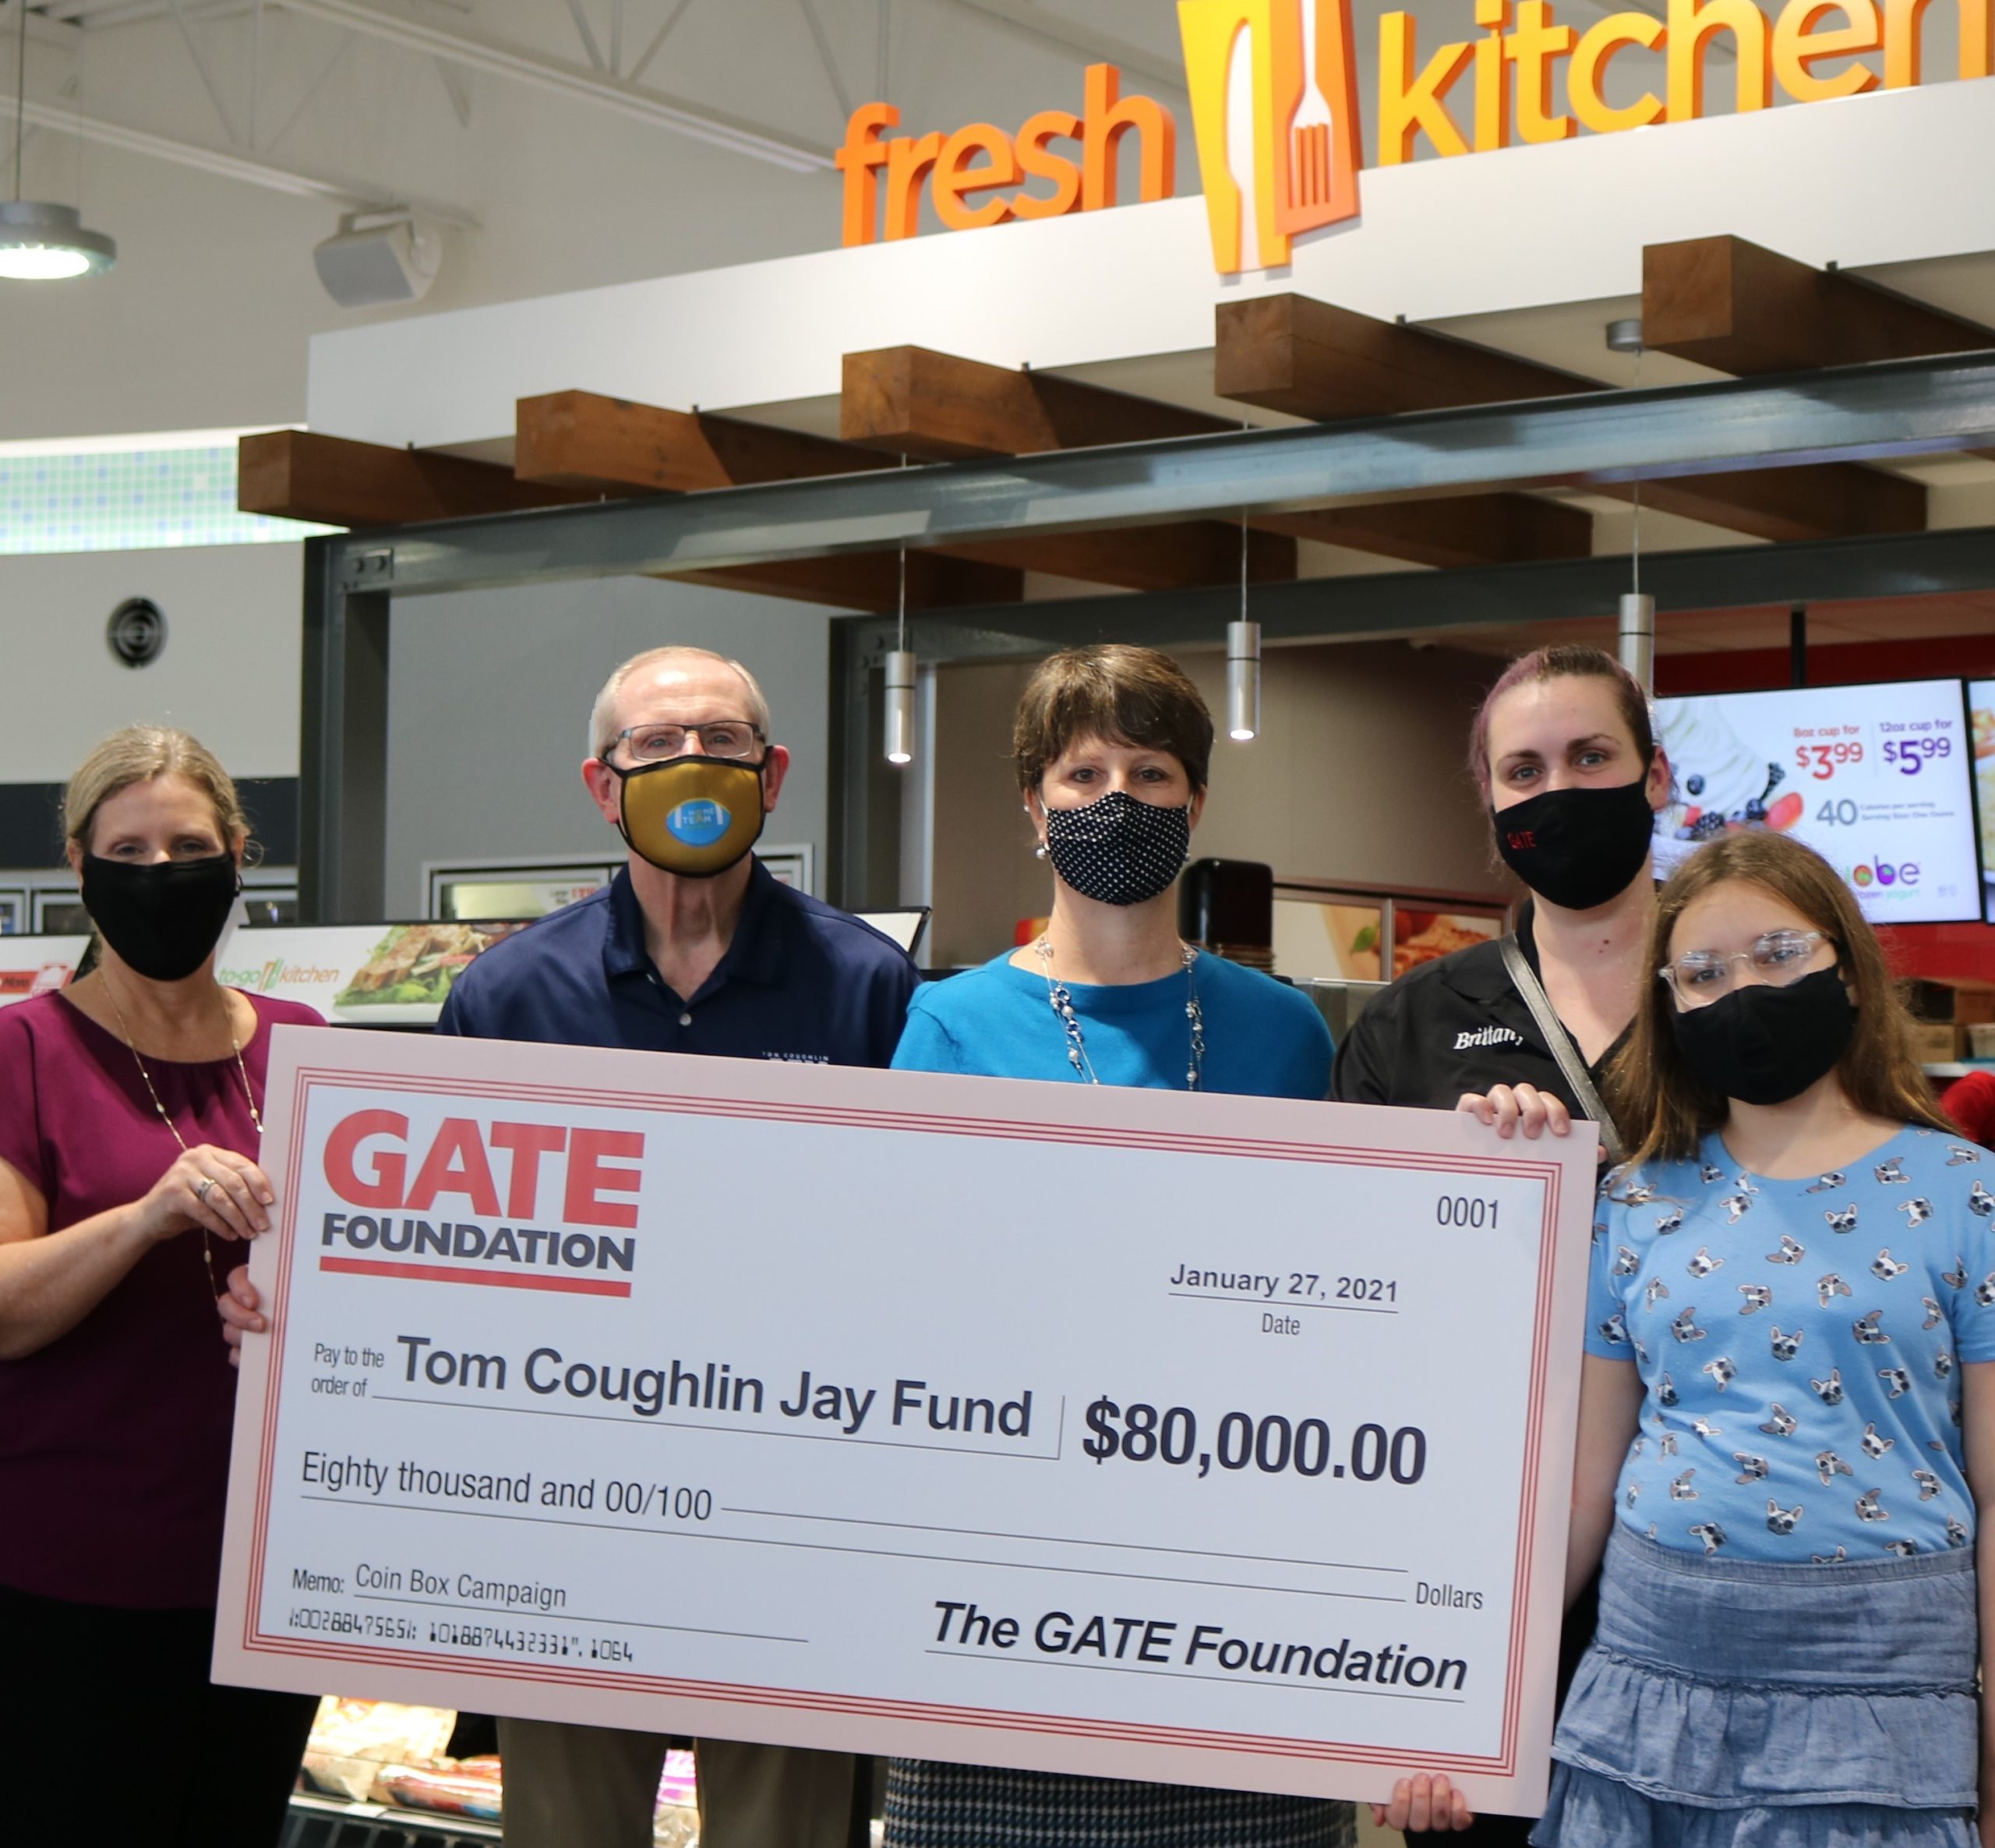 GATE COIN BOX, CHARITY ROUND-UP CAMPAIGN RAISES $80,000 FOR TOM COUGHLIN JAY FUND